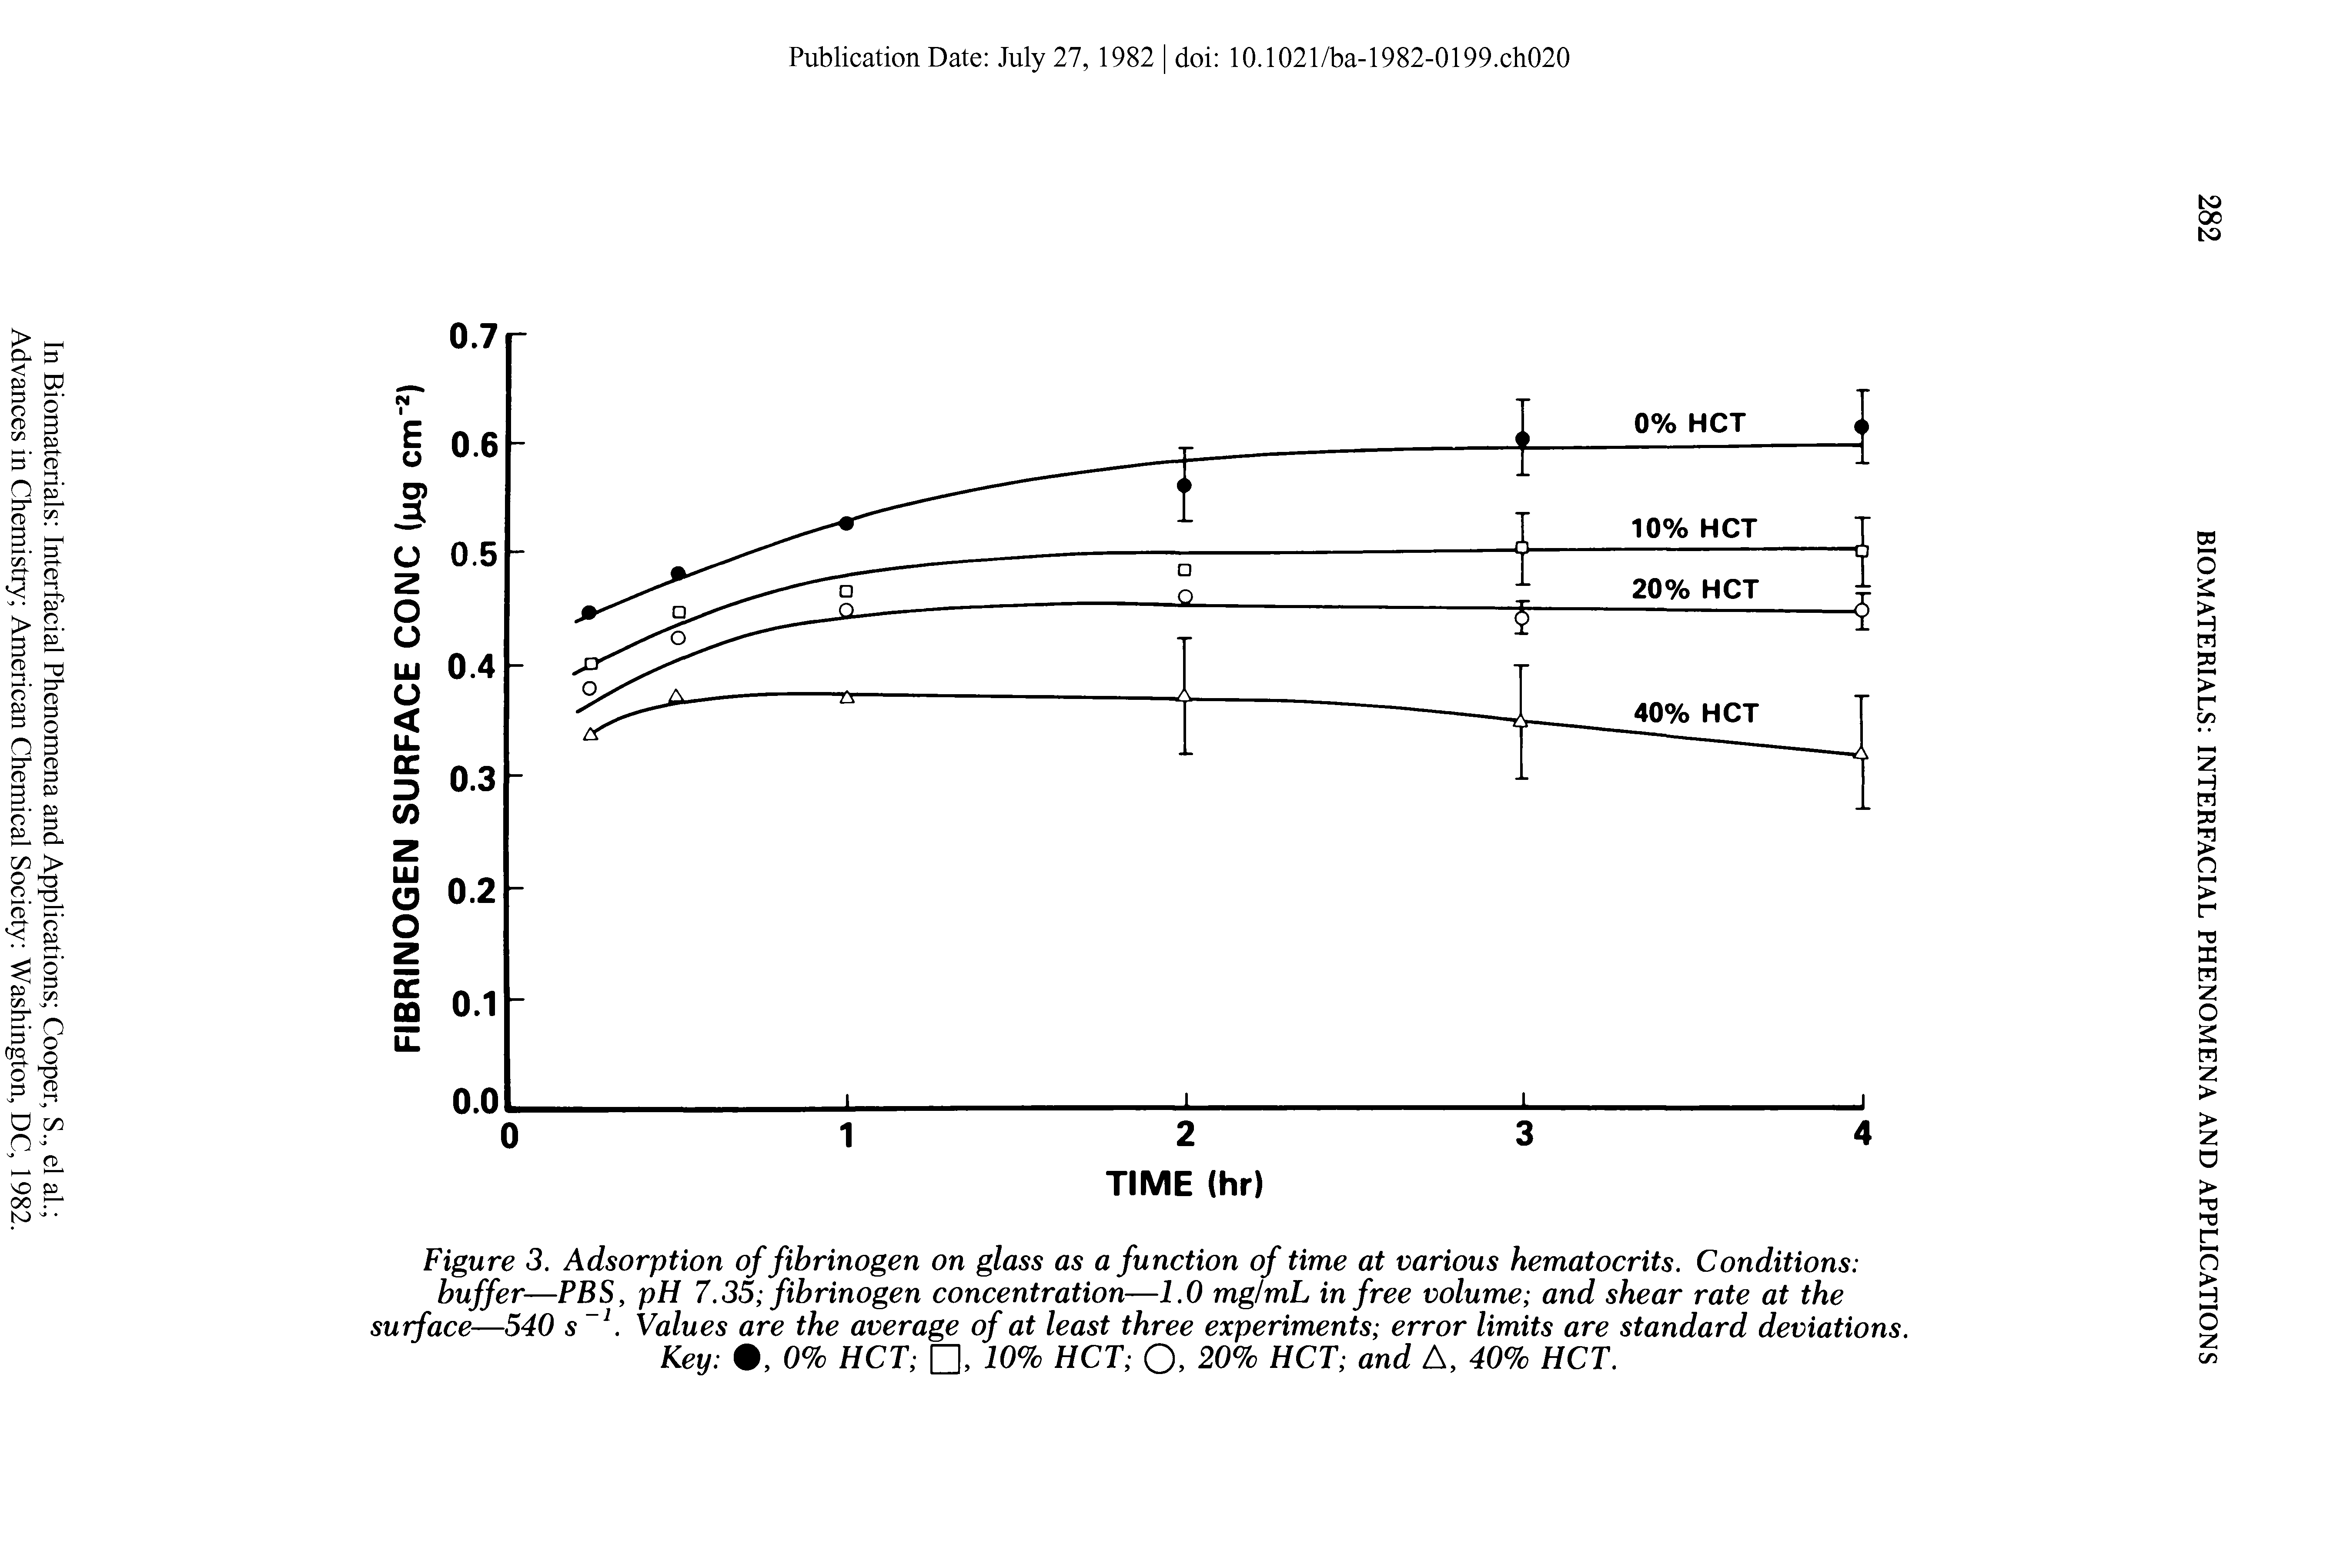 Figure 3. Adsorption of fibrinogen on glass as a function of time at various hematocrits. Conditions buffer—PBS, pH 7.35 fibrinogen concentration—1.0 mg/mL in free volume and shear rate at the surface—540 s Values are the average of at least three experiments error limits are standard deviations.